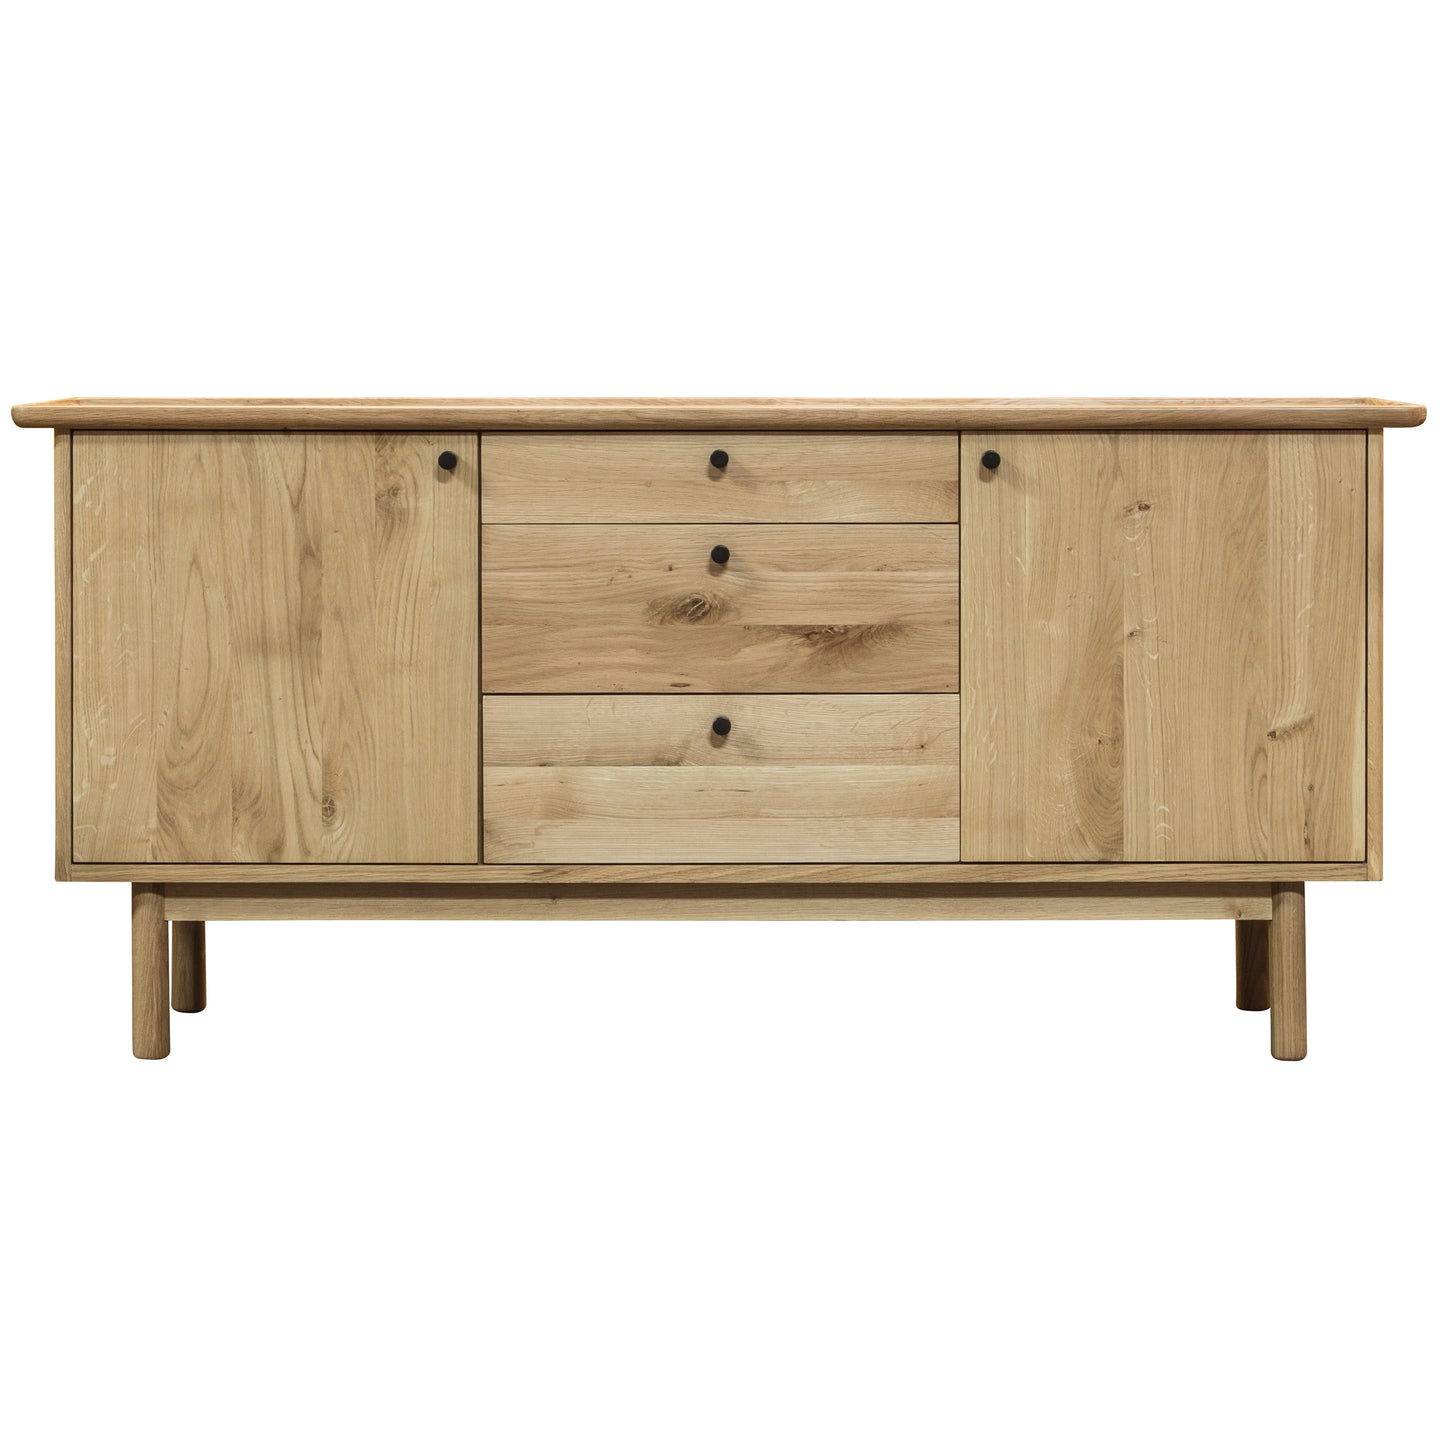 A Wembury 2 Door 3 Drawer Sideboard 1500x450x710mm from Kikiathome.co.uk featuring wooden drawers for interior decor.